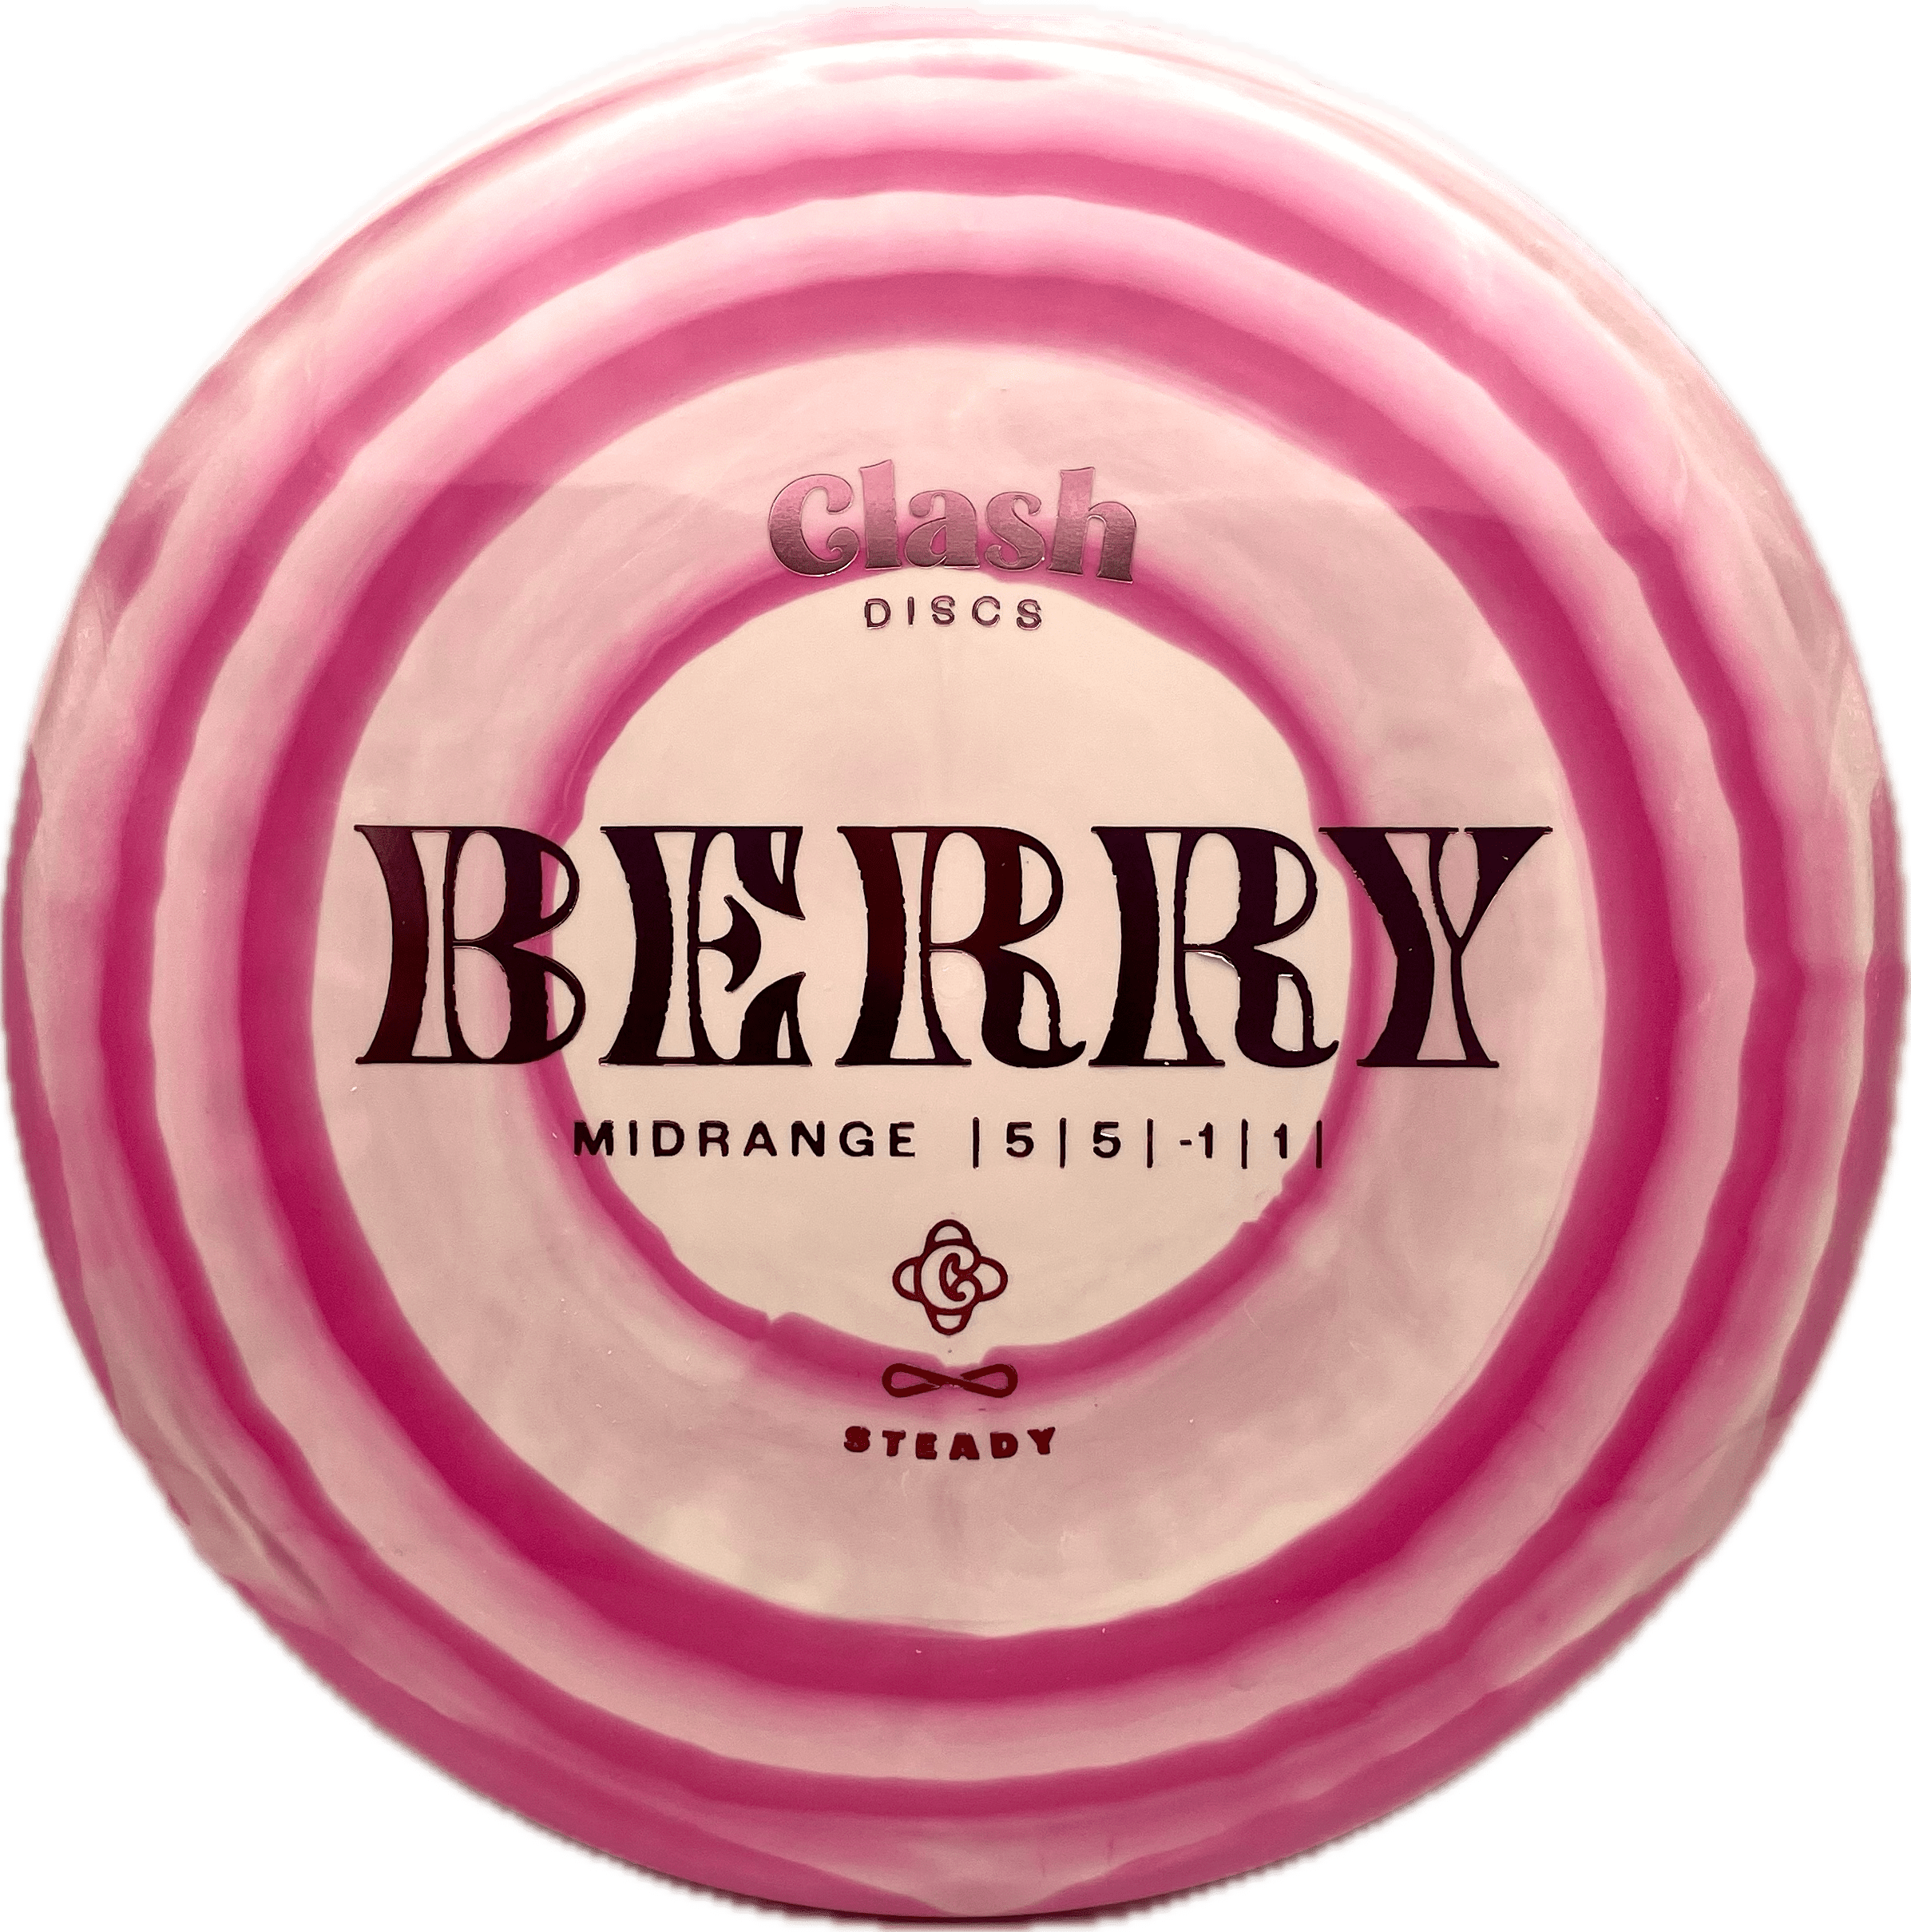 Clash Disc Clash Berry, Steady, 174-175, Pink/White Rings, Pink Metallic